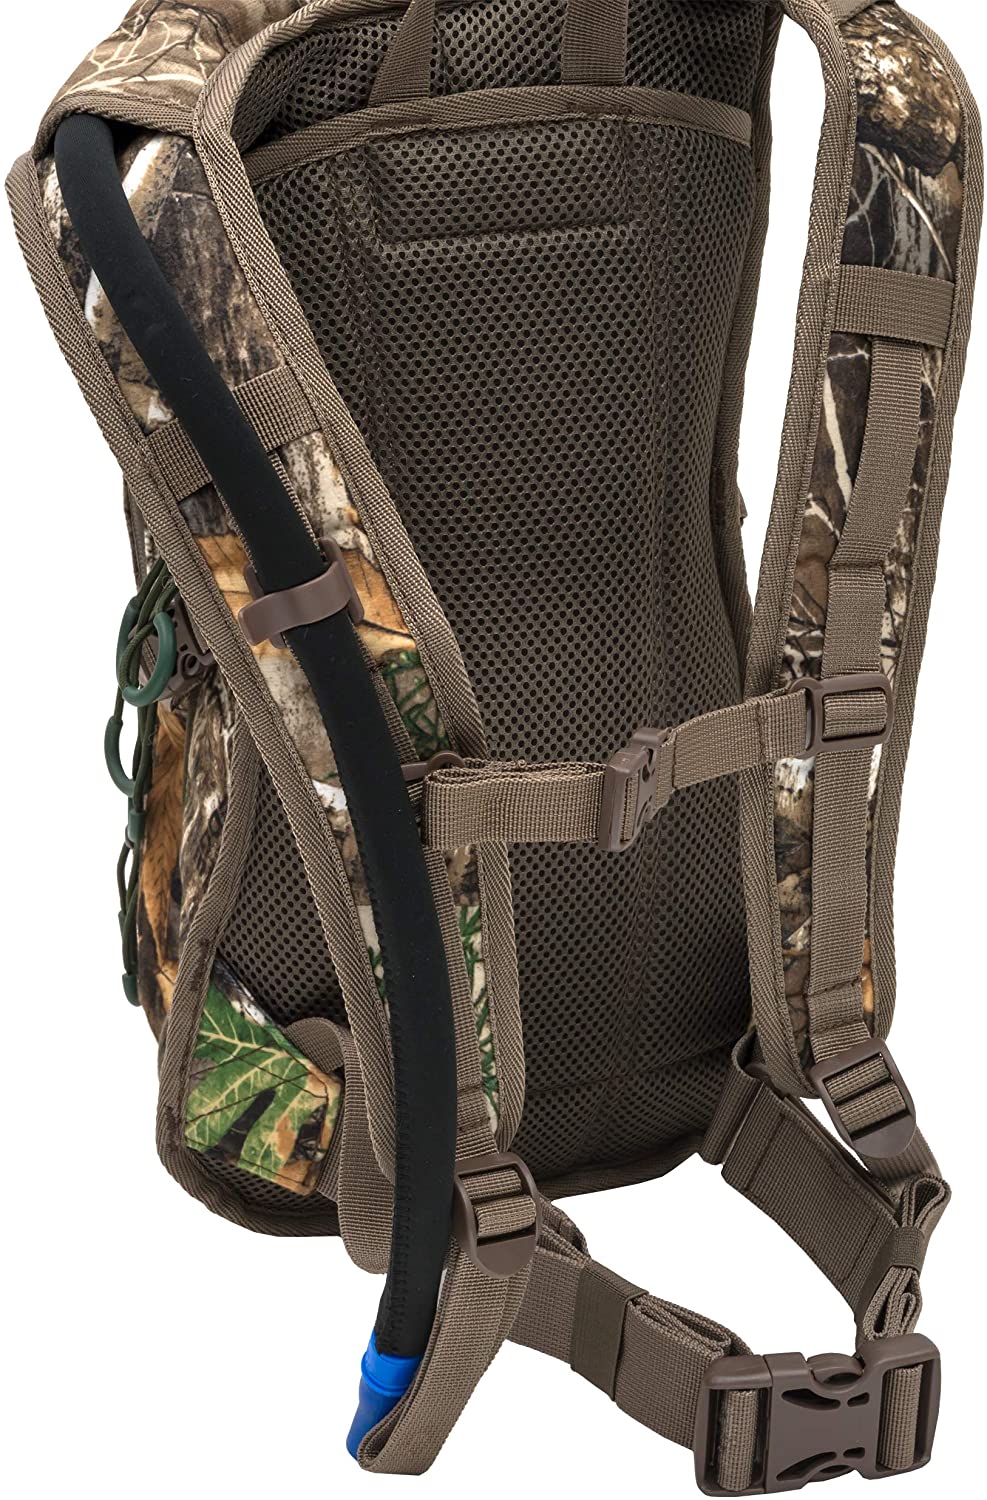 ALPS OutdoorZ Willow Creek Hunting Pack, Realtree Edge - AL9411100